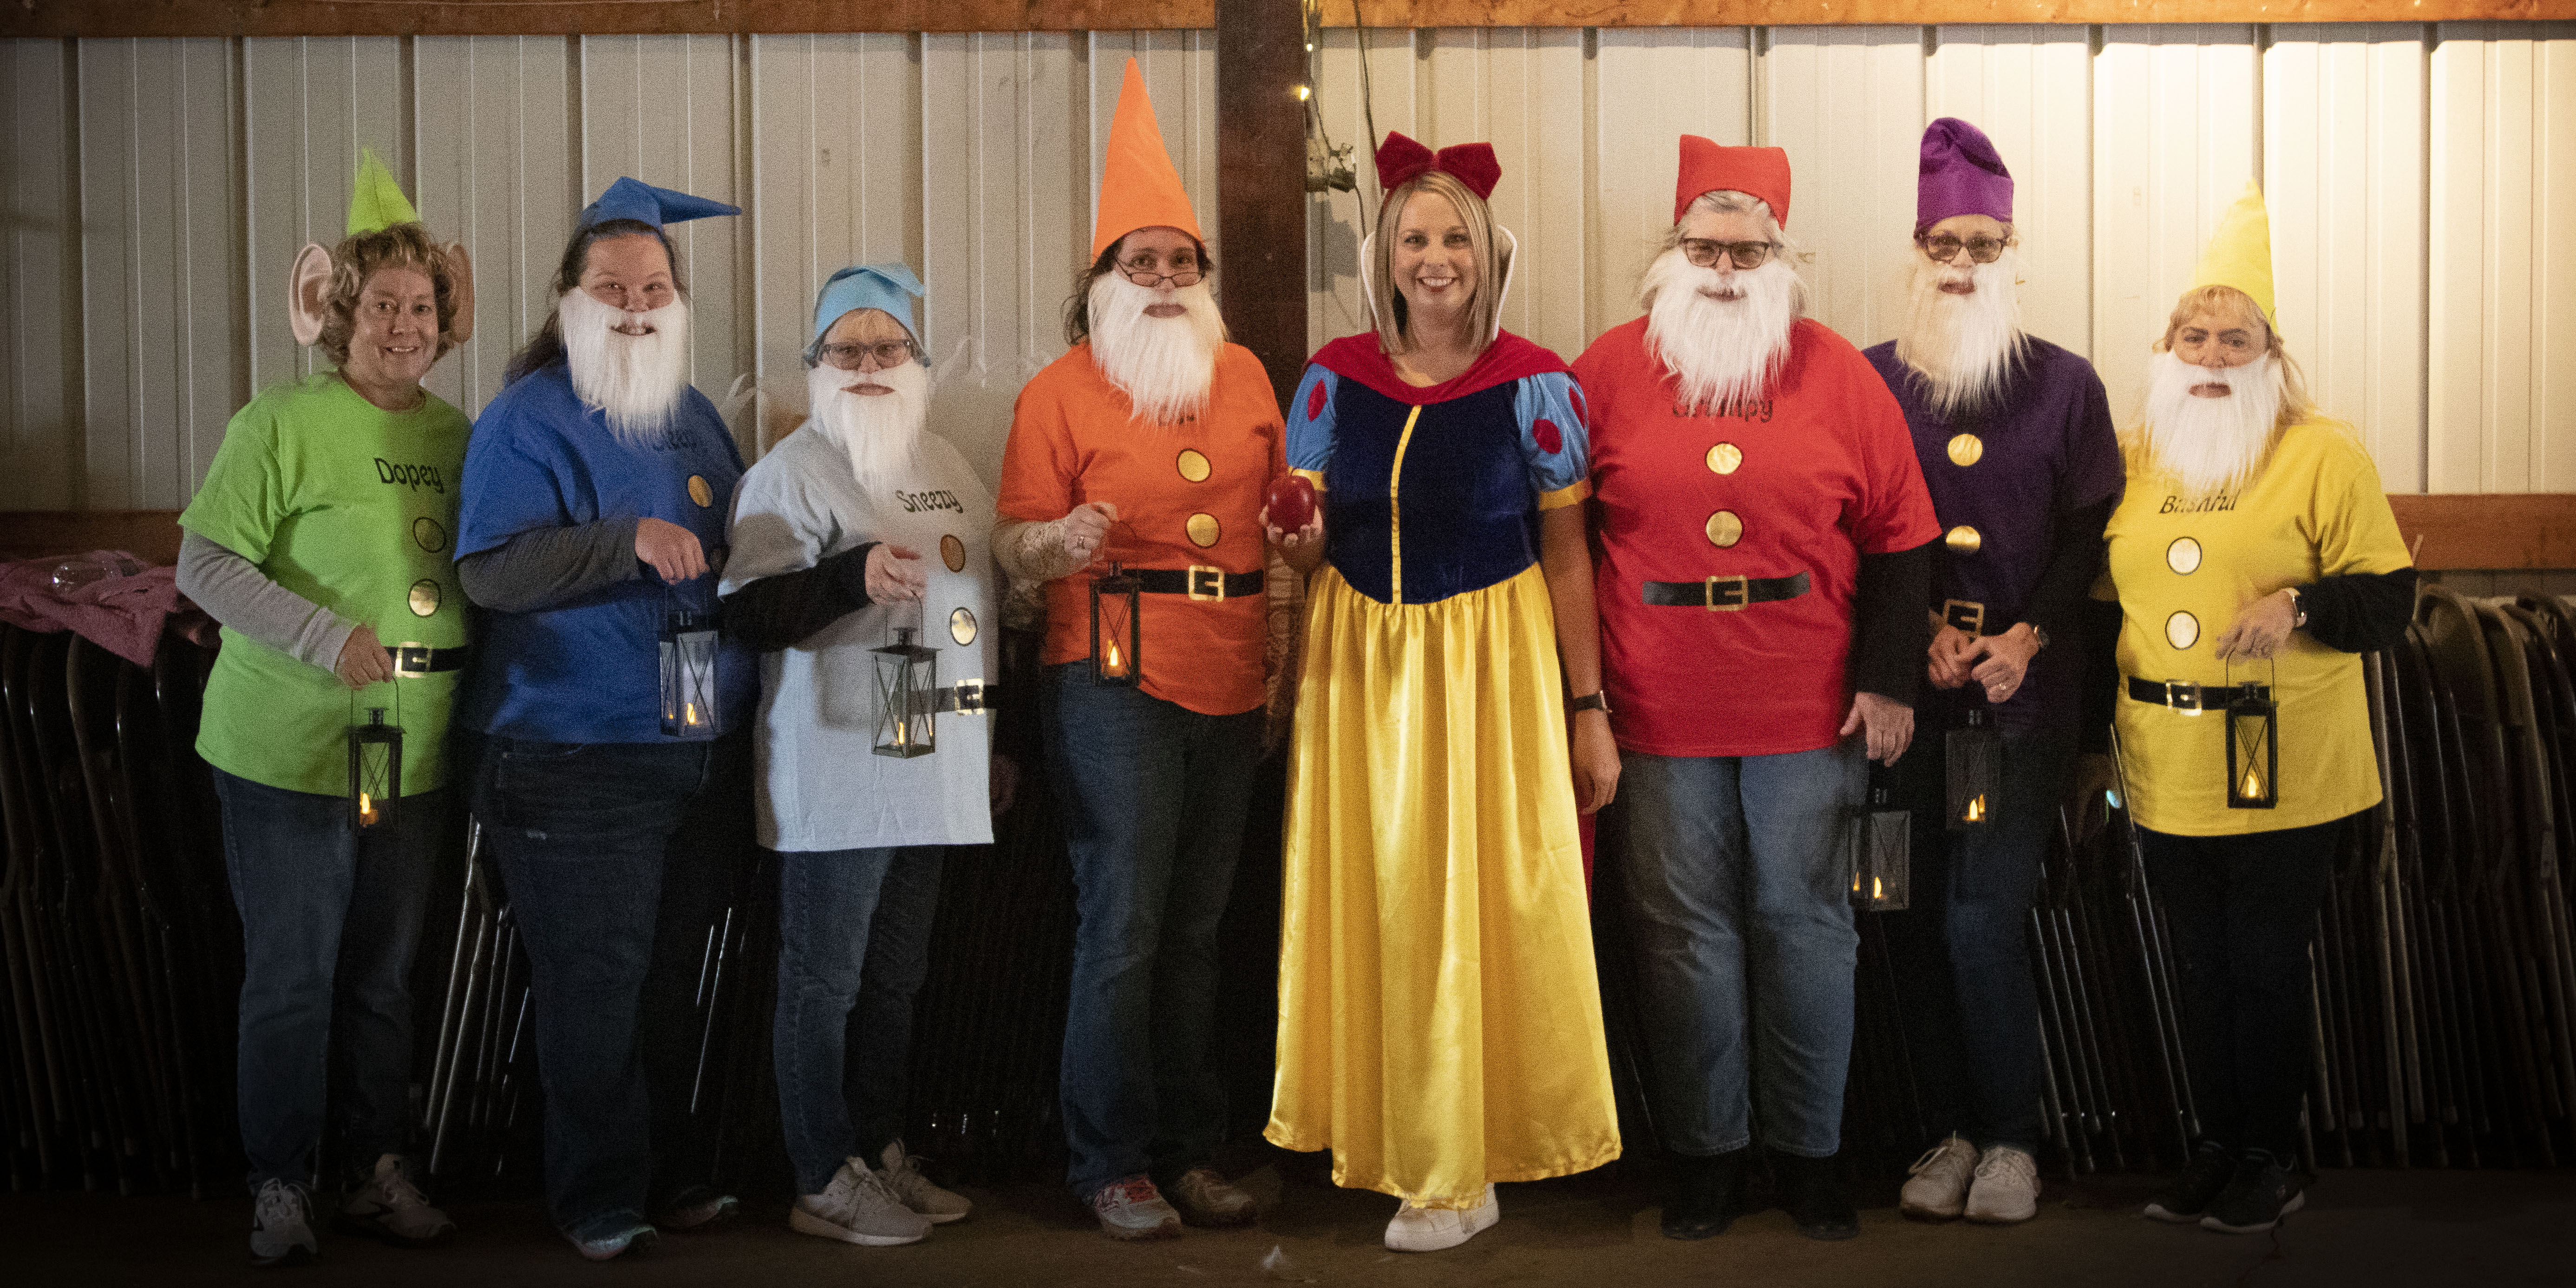 staff at Carlinville area hospital dressed as snow white and the seven dwarves